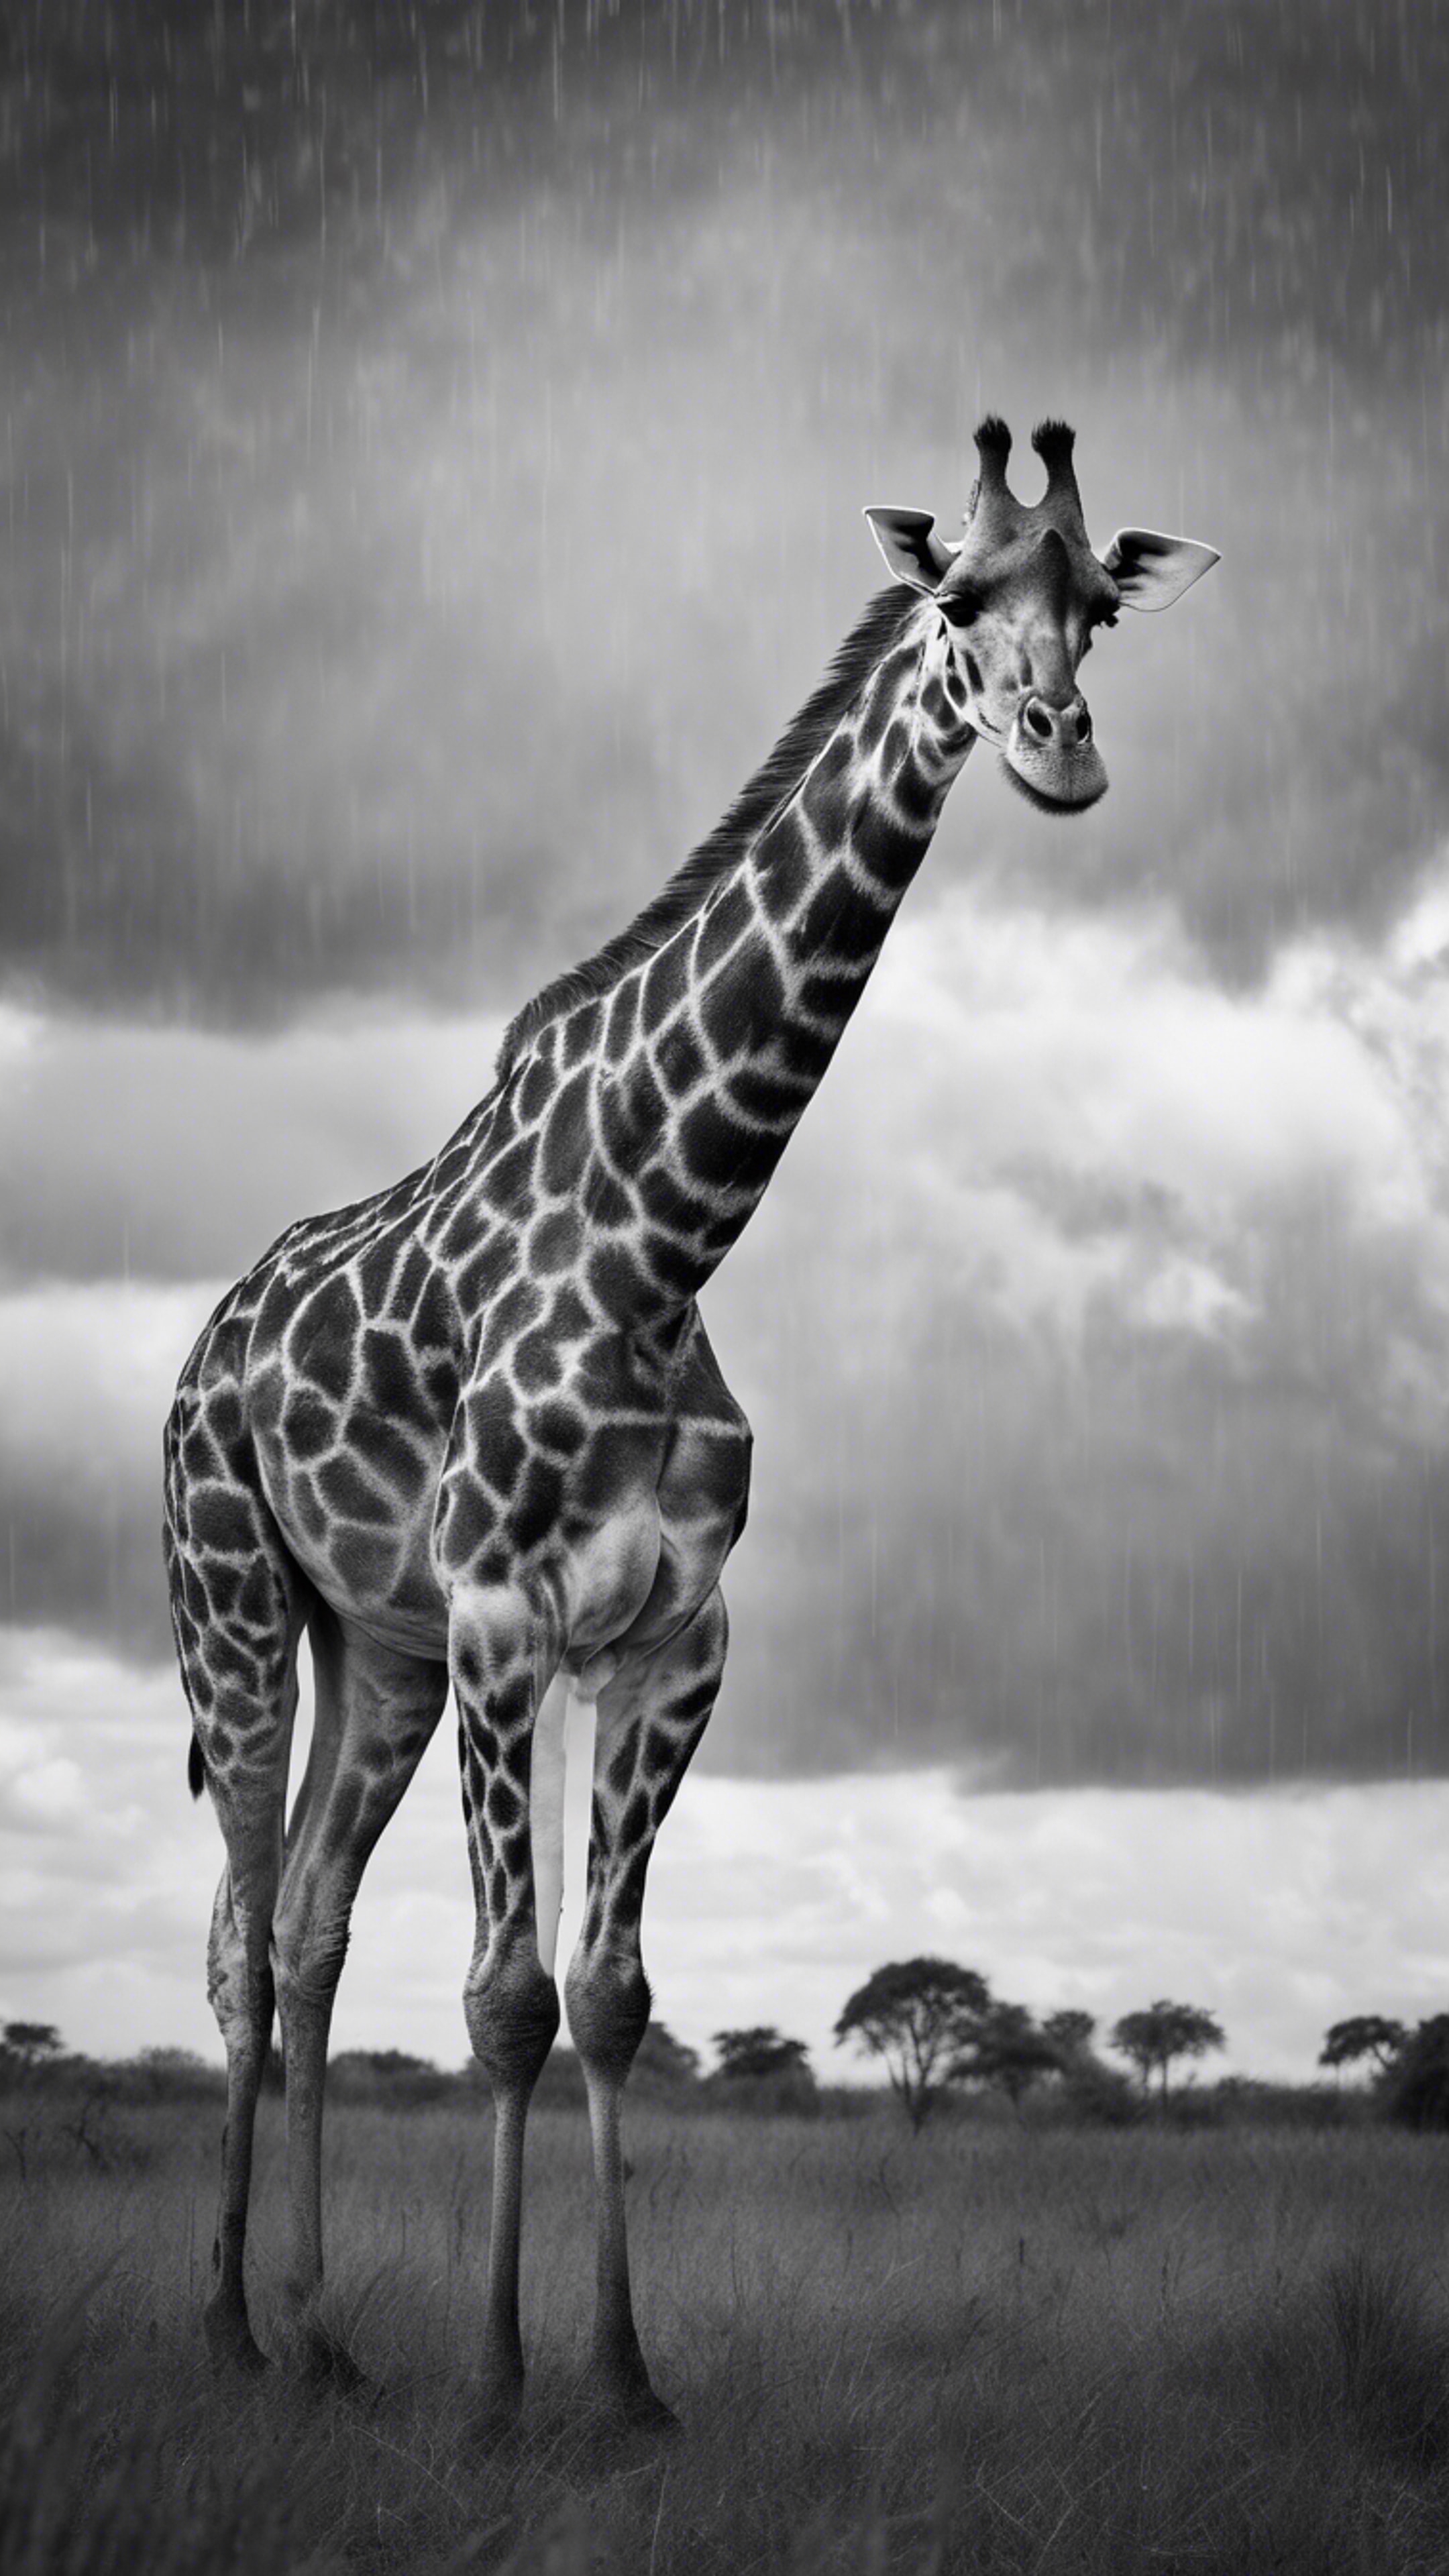 A beautifully photographed black and white image of a giraffe sauntering under rain clouds. Papel de parede[33f5eecce55b4c40952e]